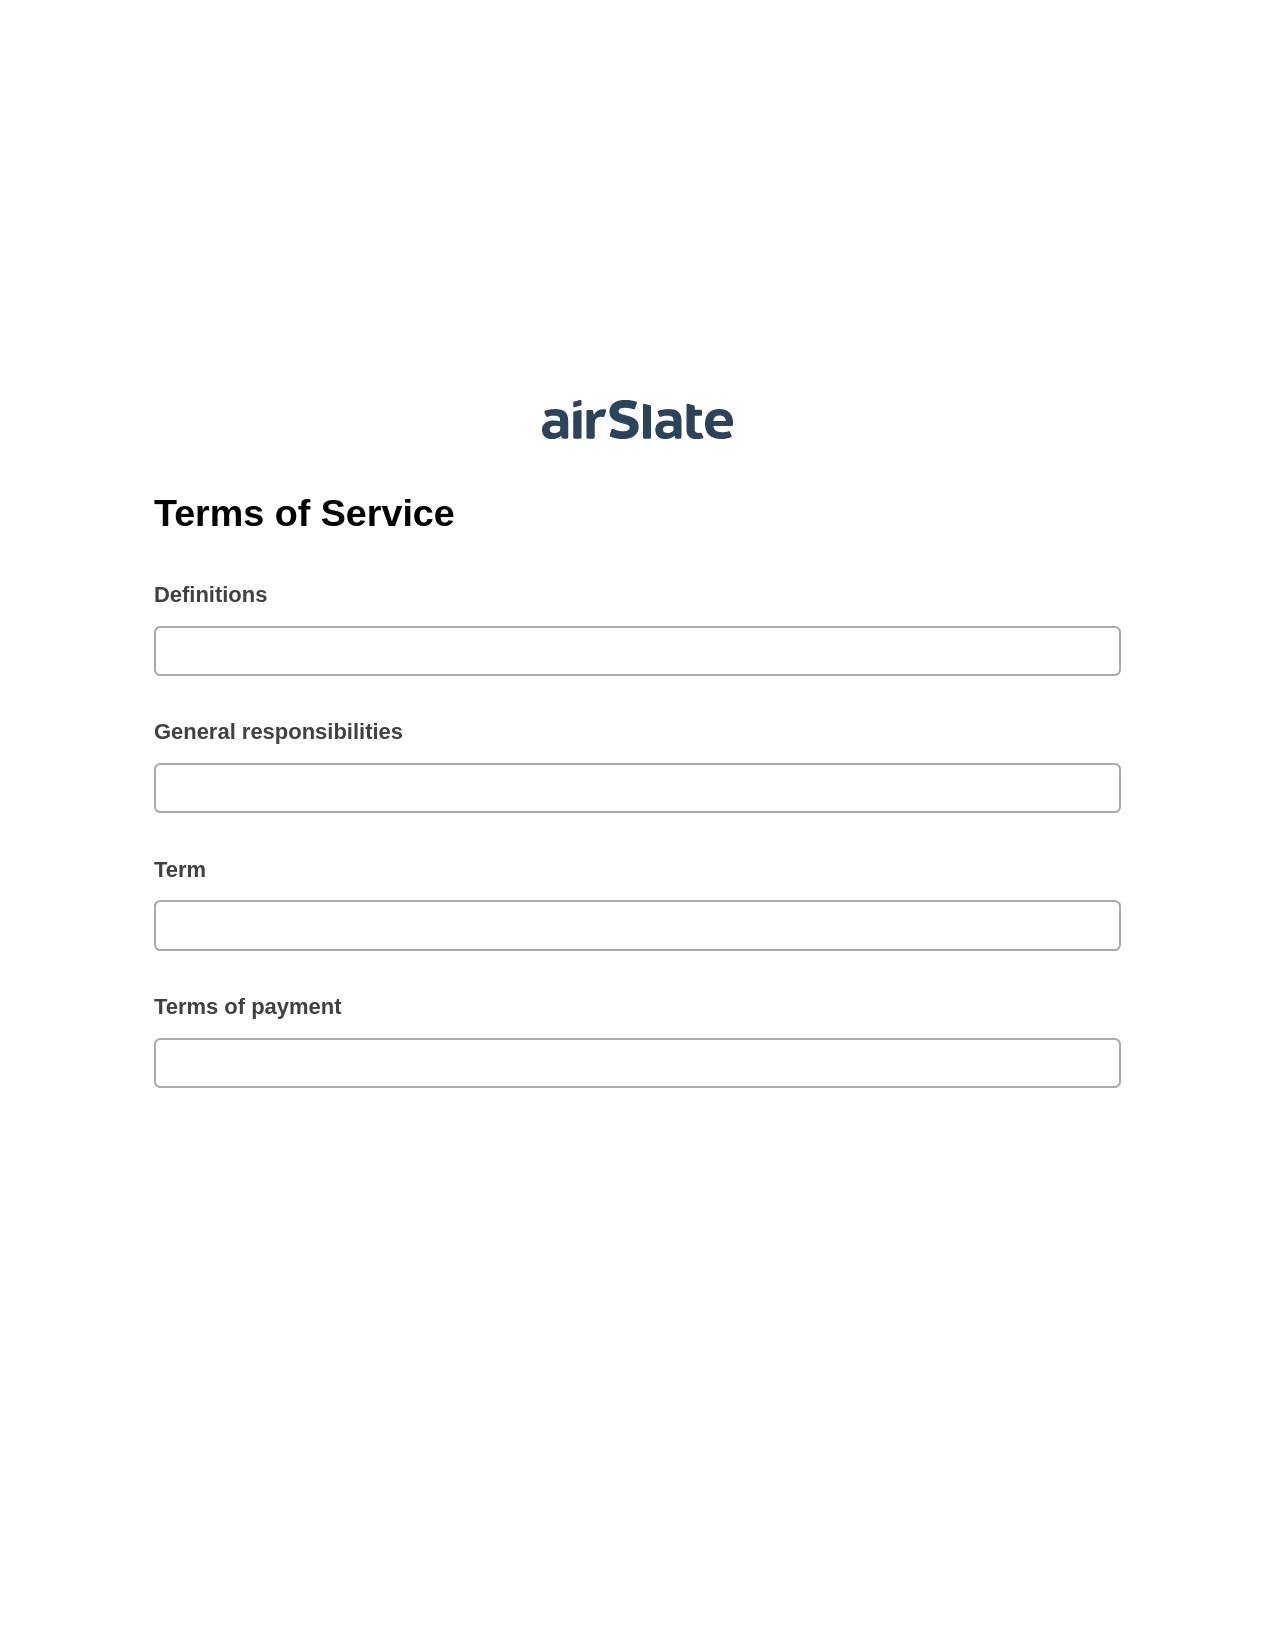 Multirole Terms of Service Pre-fill Slate from MS Dynamics 365 Records Bot, Assign Roles to Recipients Bot, Google Drive Bot